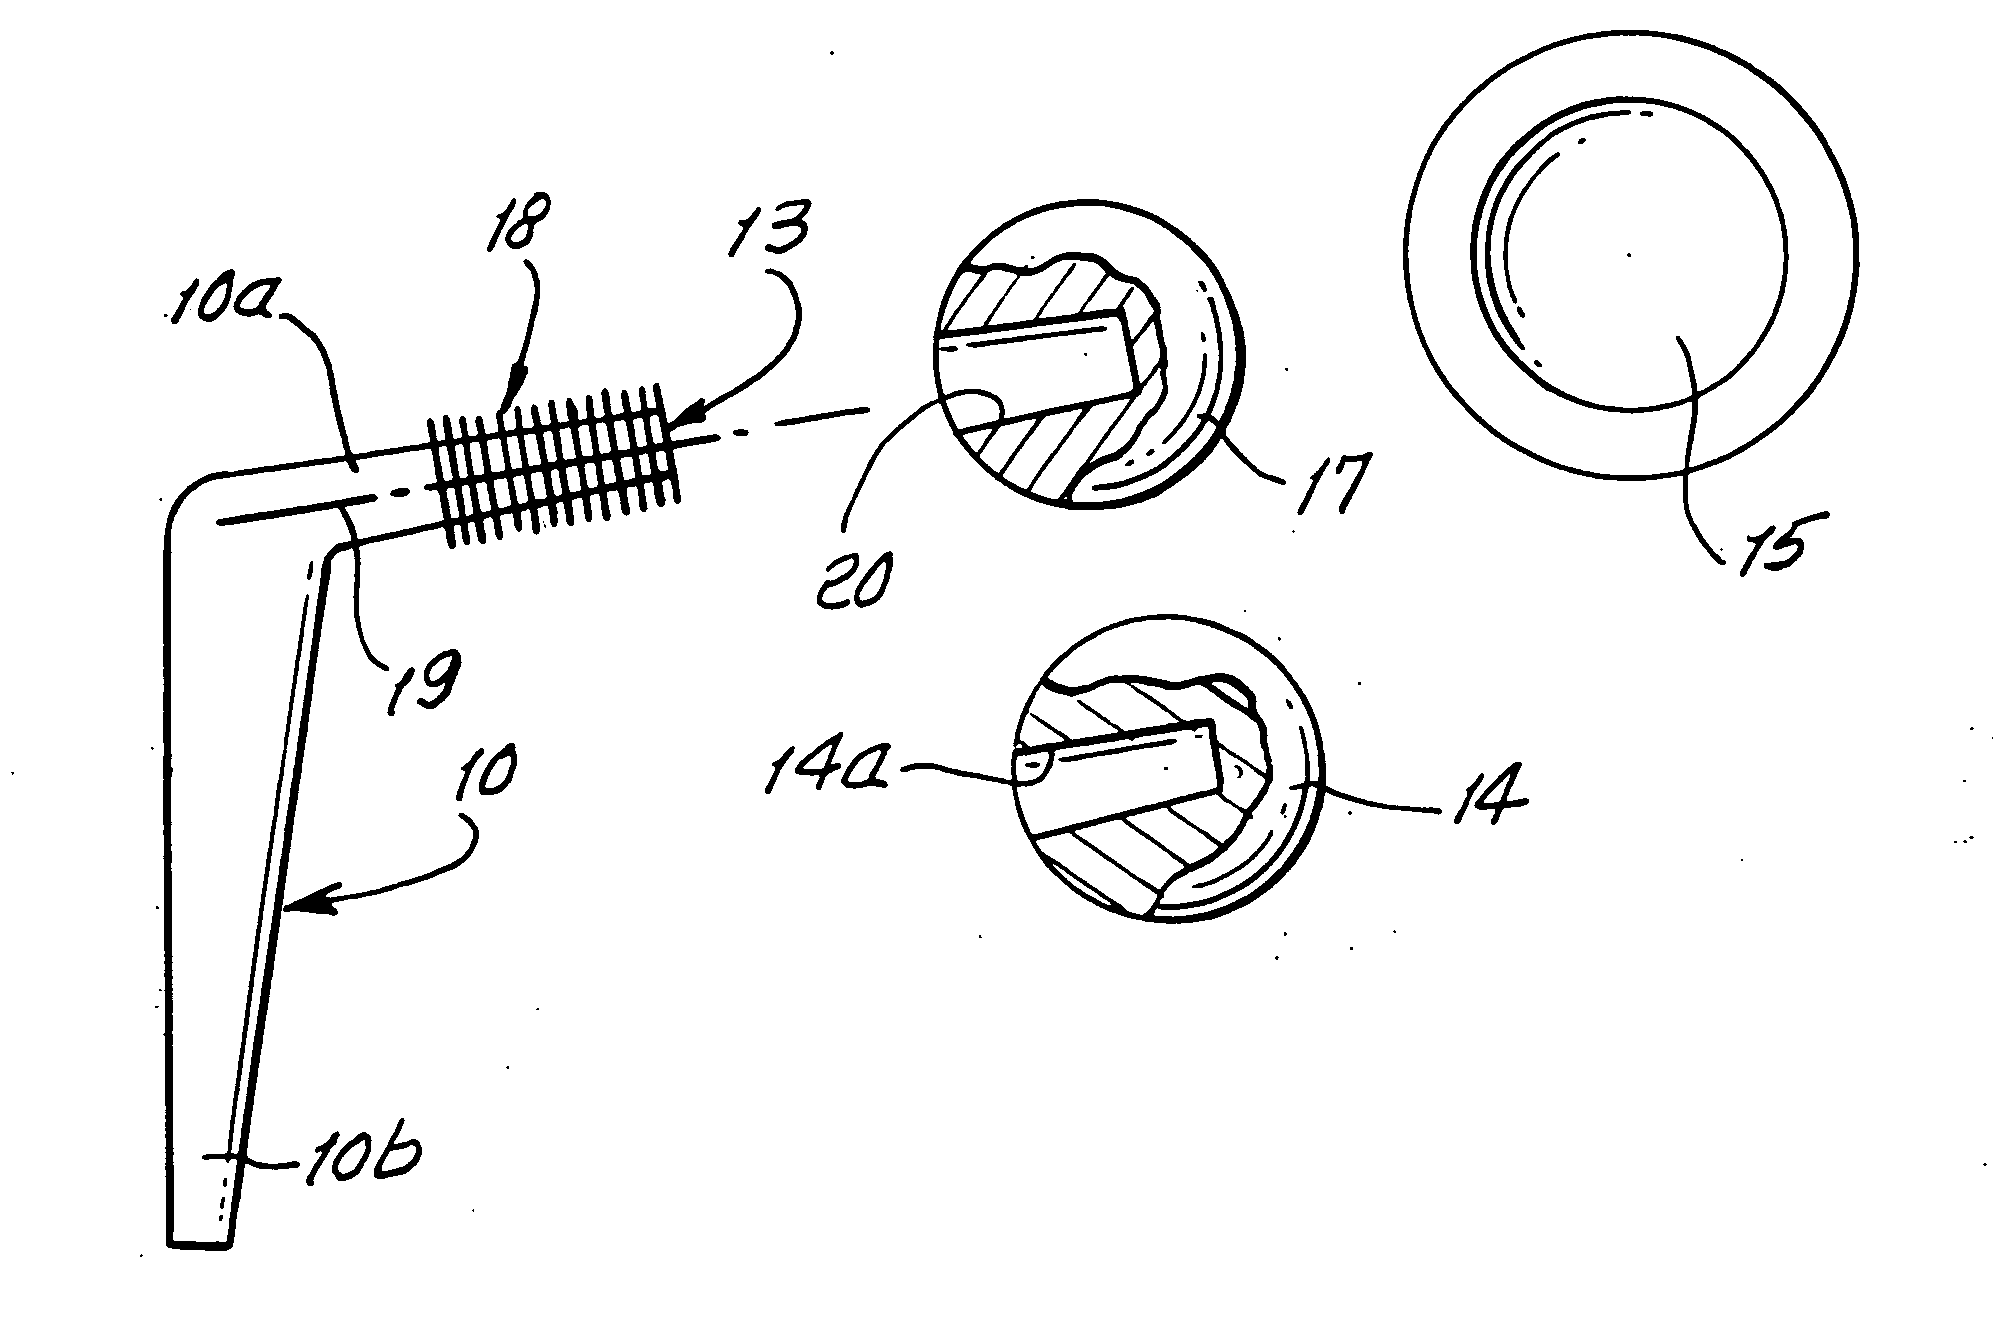 Hip surgery neck and ball adjustment apparatus and method